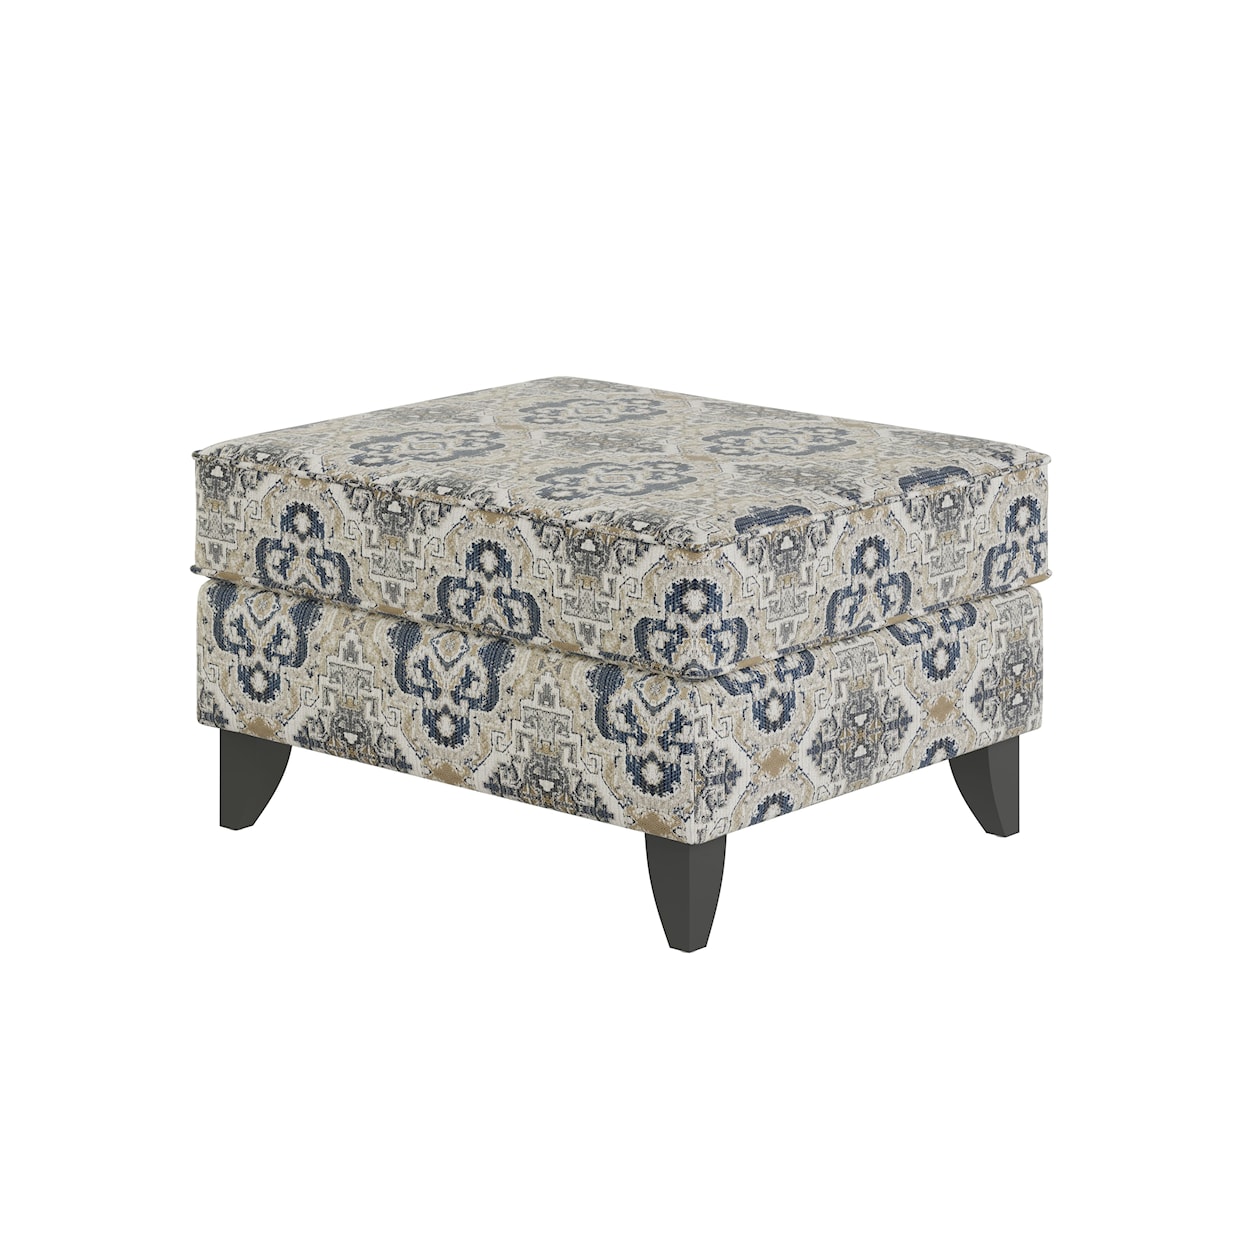 Fusion Furniture 1170 PLUMLEY BISQUE Accent Ottoman